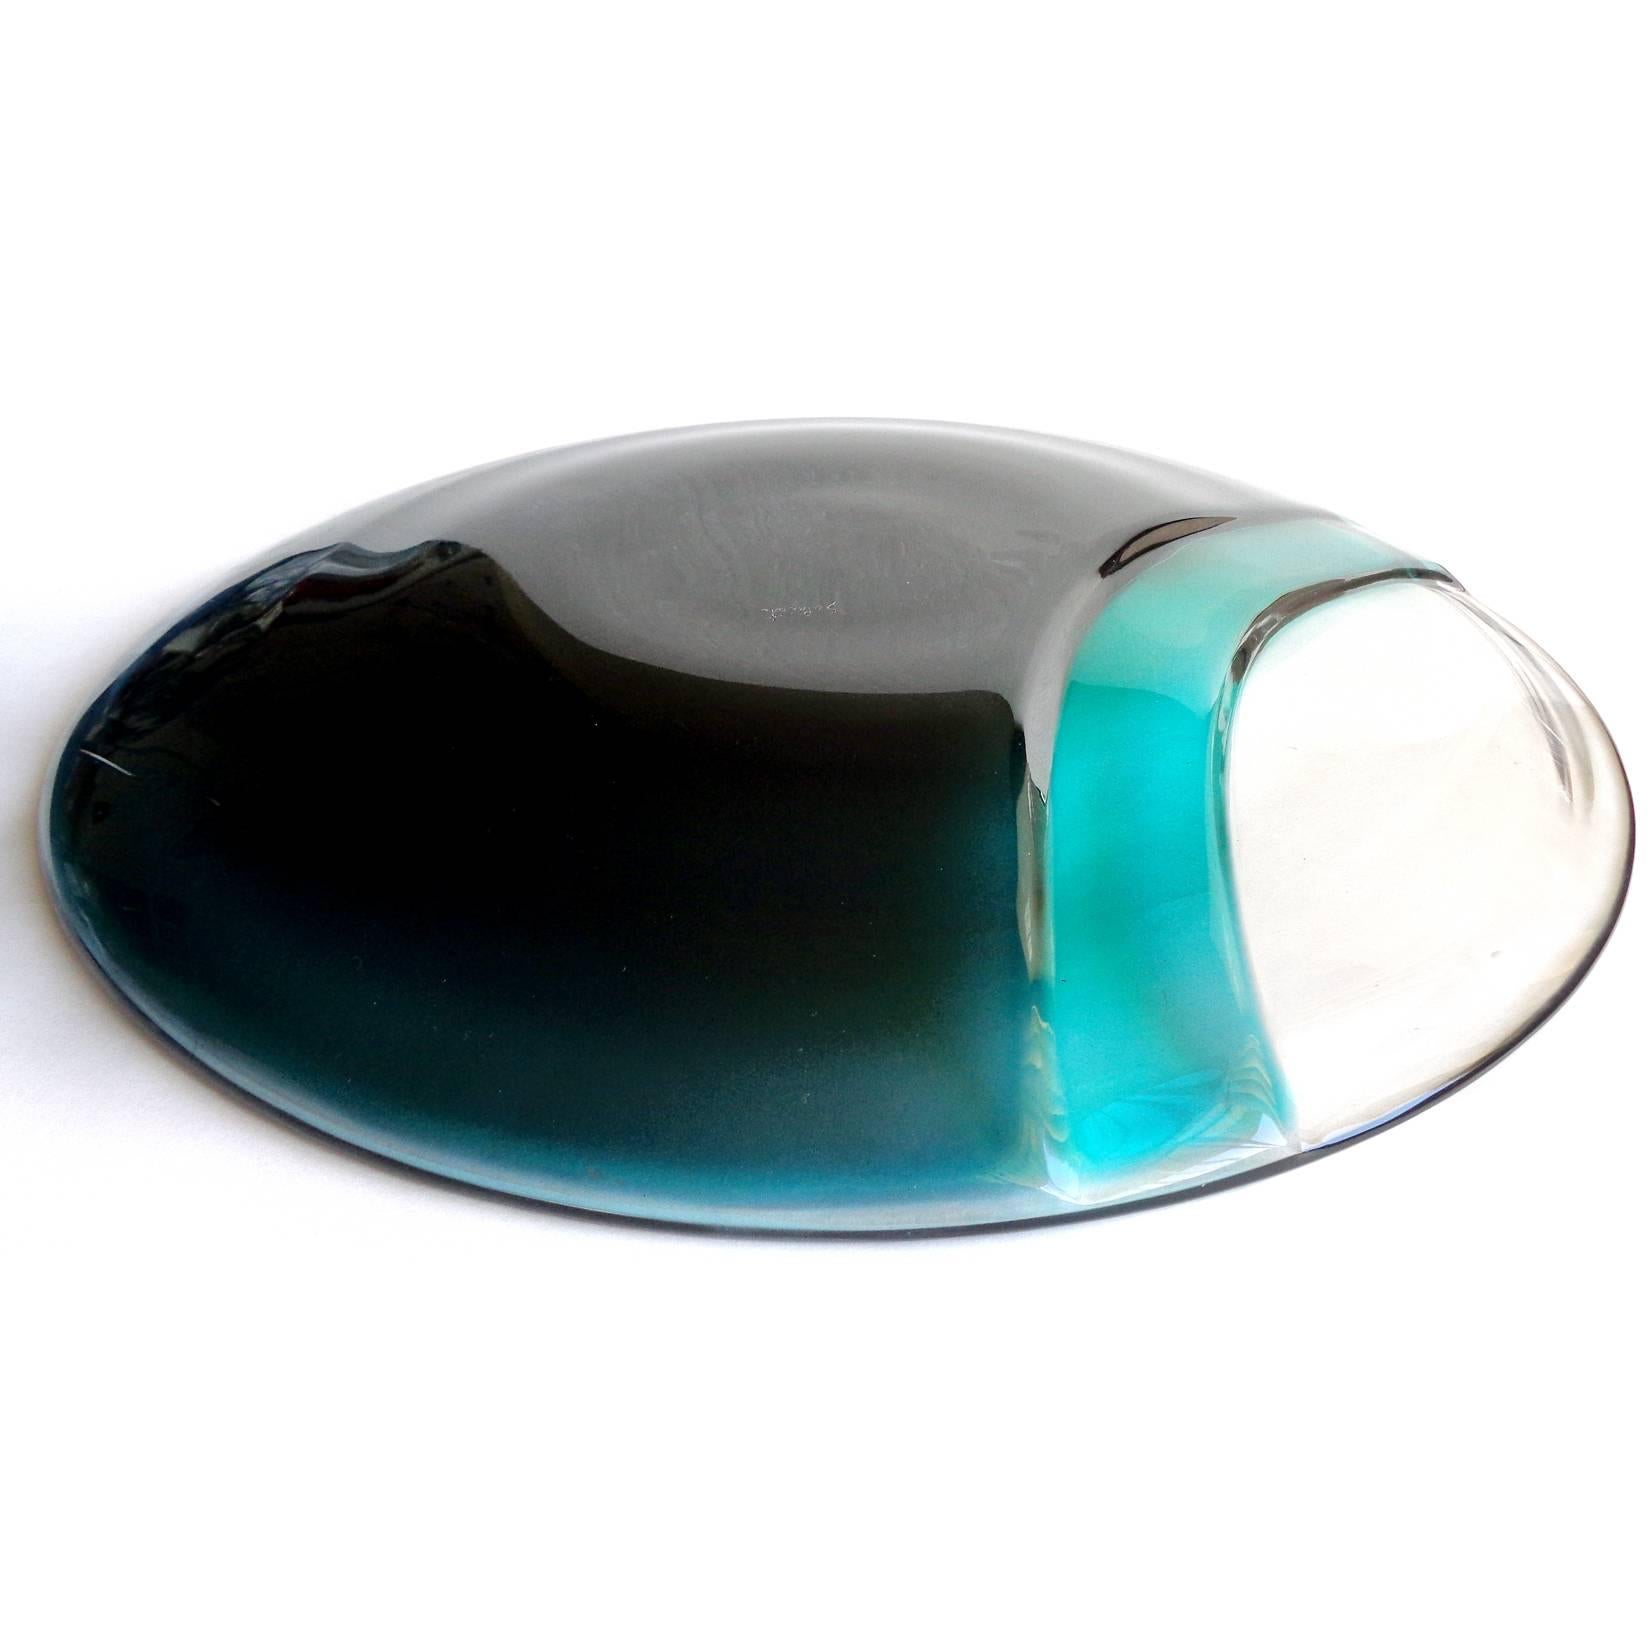 Free shipping worldwide! See details below description.

Very large Murano handblown green and clear art glass centerpiece bowl. Documented and signed by the Salviati company. The piece has a deep aqua green color, with lighter green band and